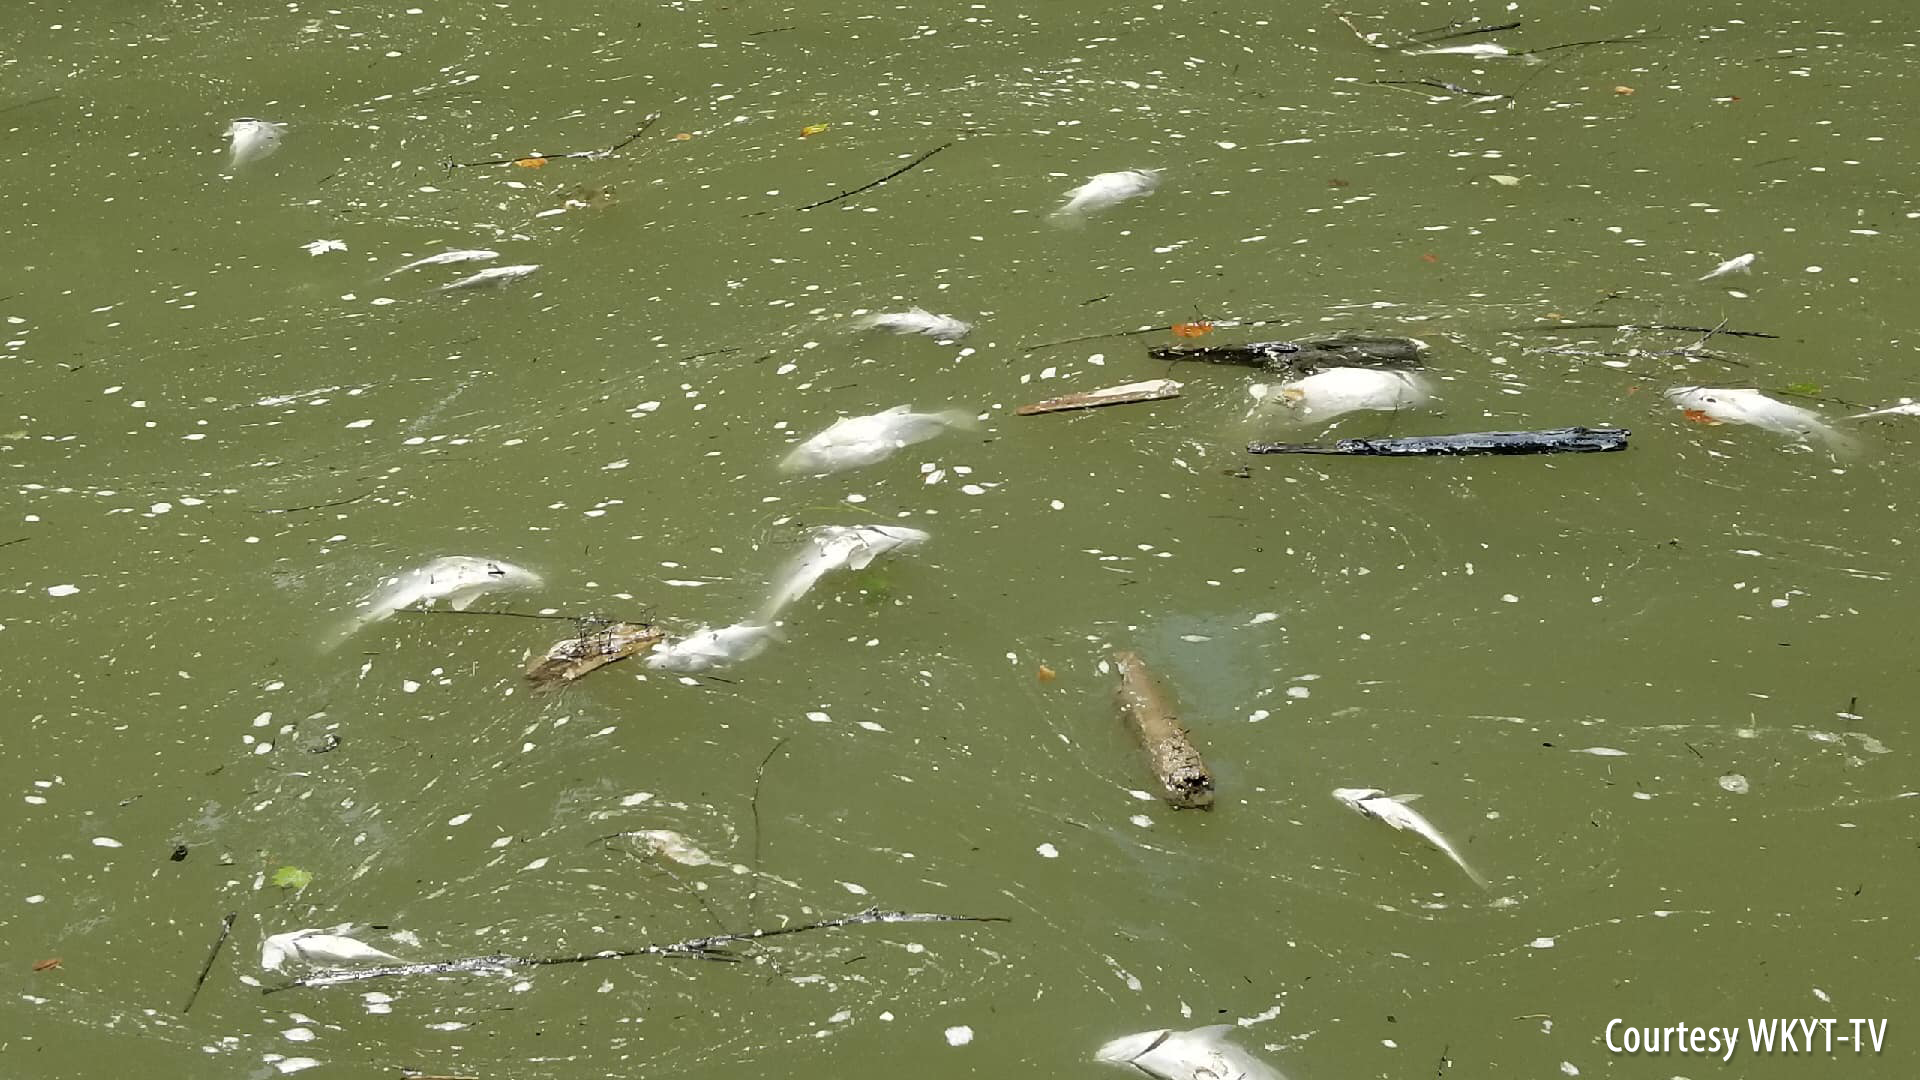 Fish floating in the Kentucky River following the Jim Beam warehouse fire. Photo courtesy WKYT-TV, Lexington, KY.